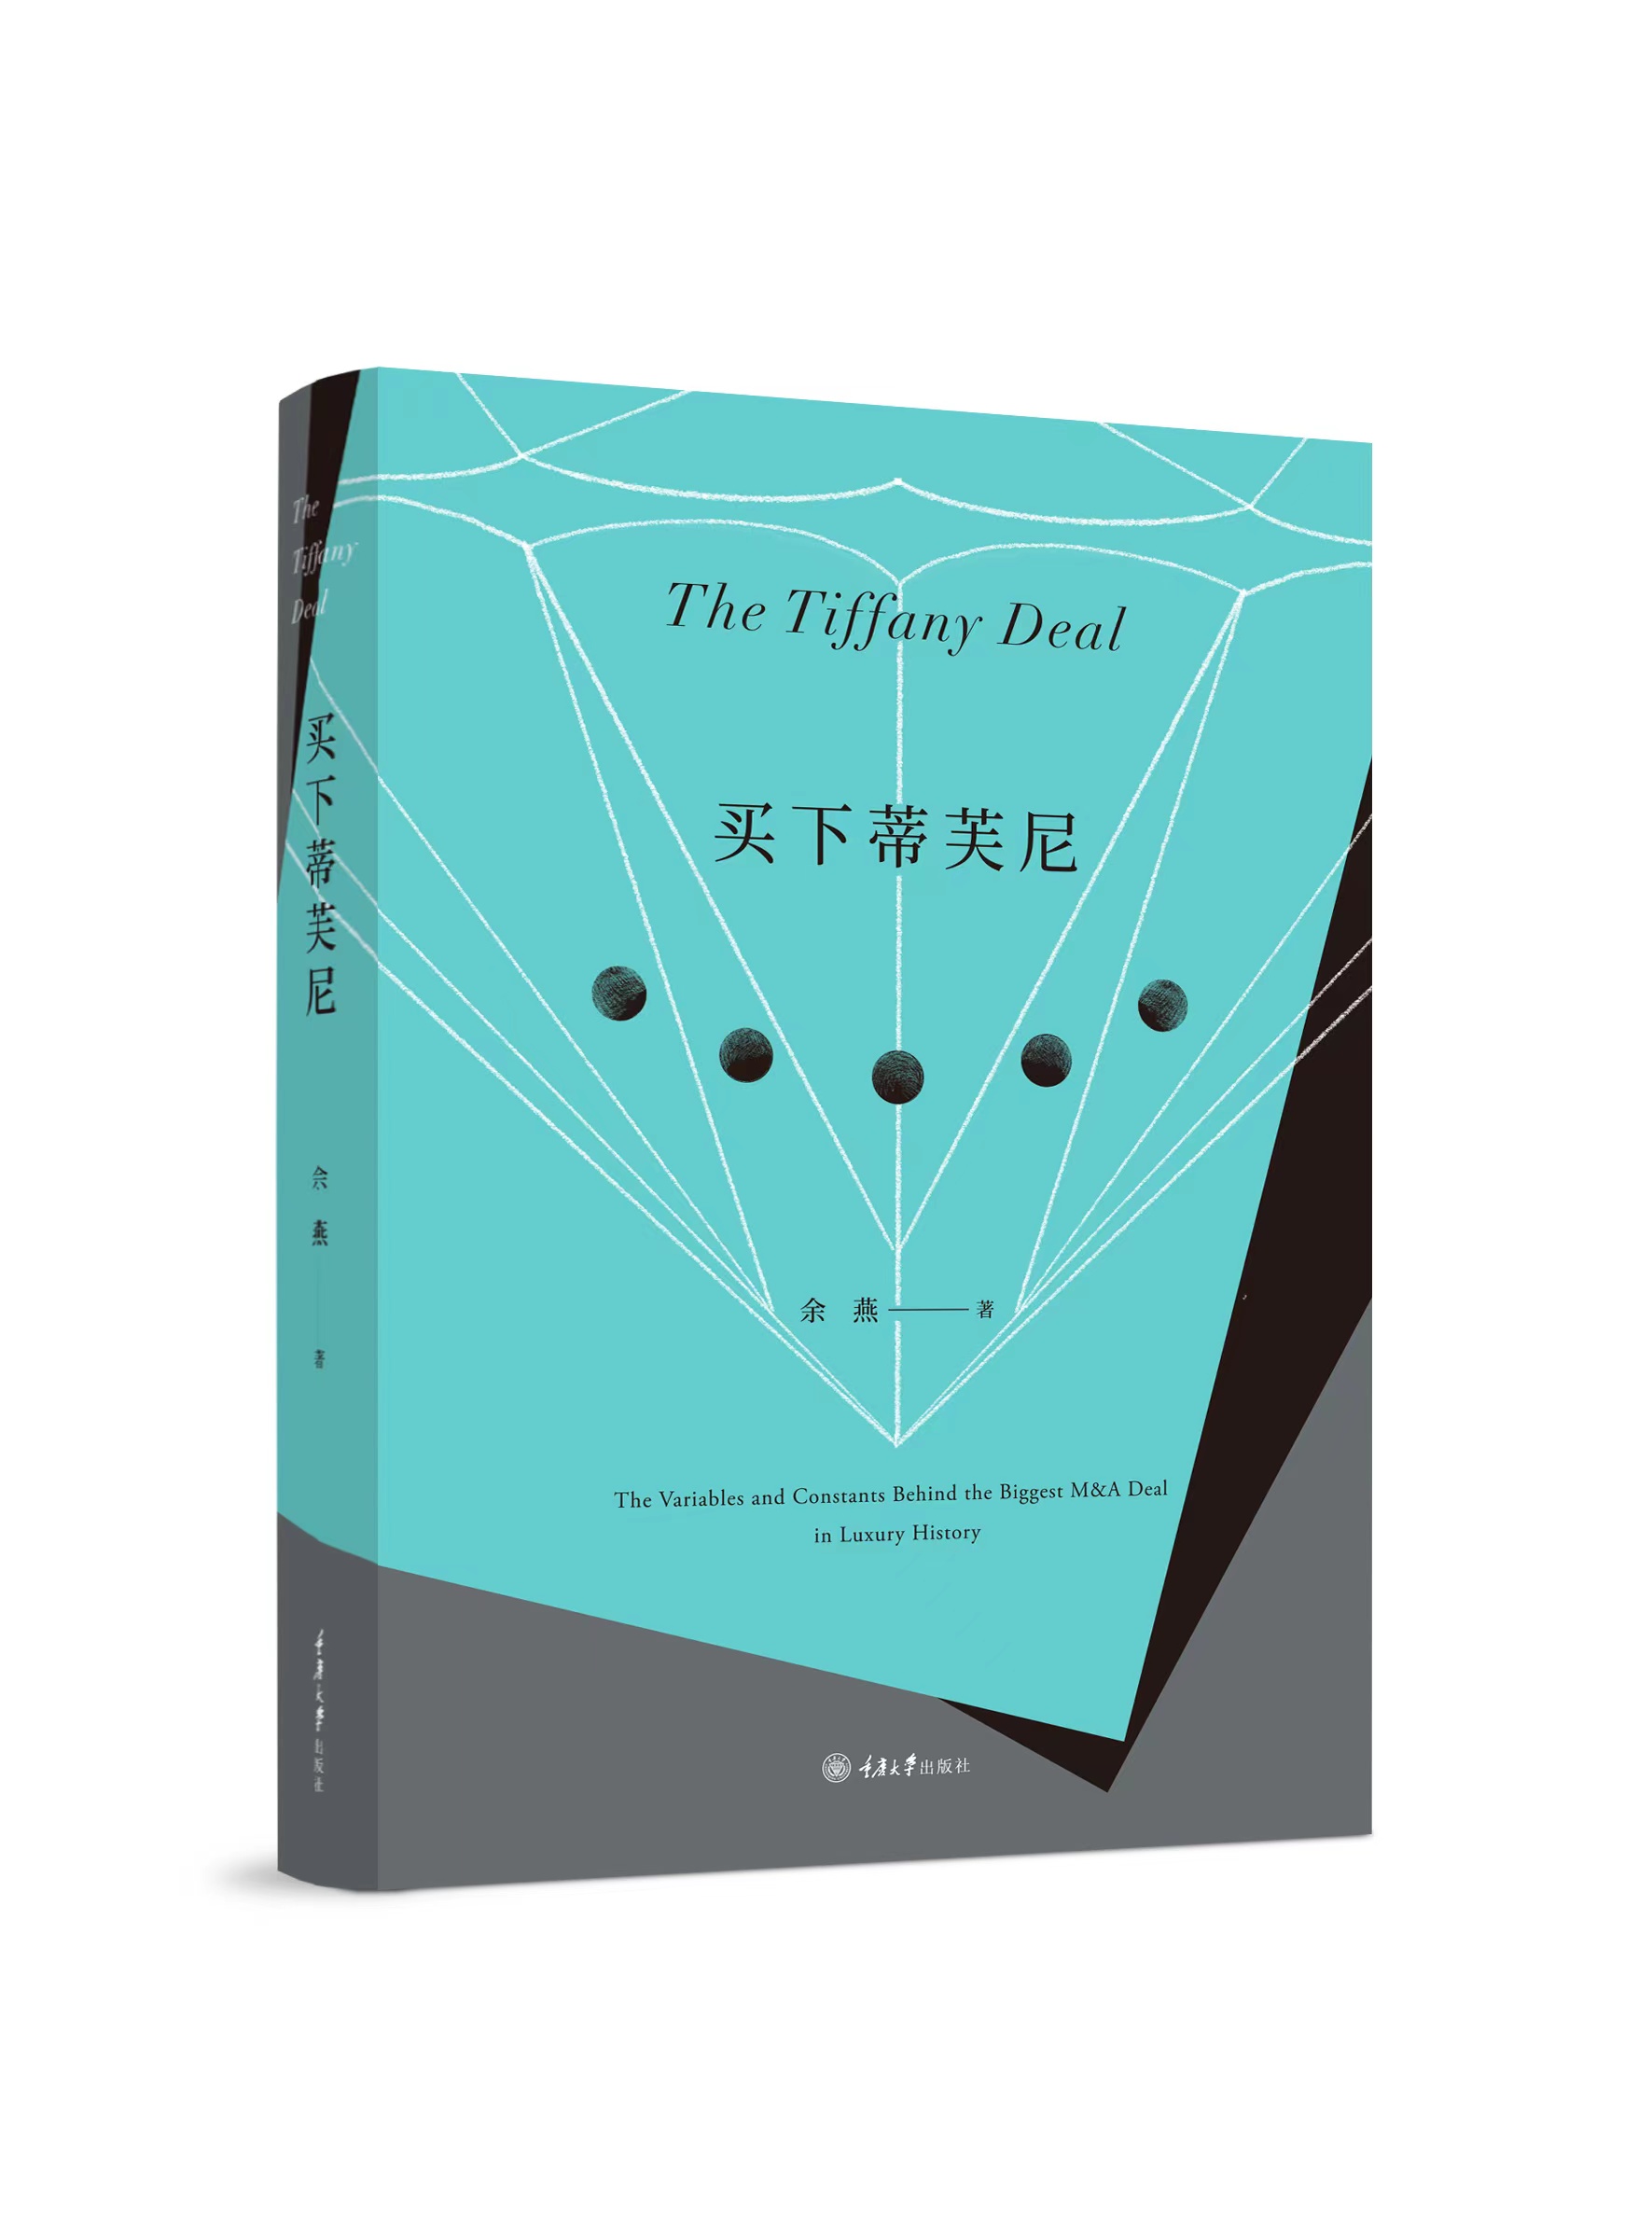 “The Tiffany Deal” by Luxe.CO Founder Alicia Yu Is Now Out!